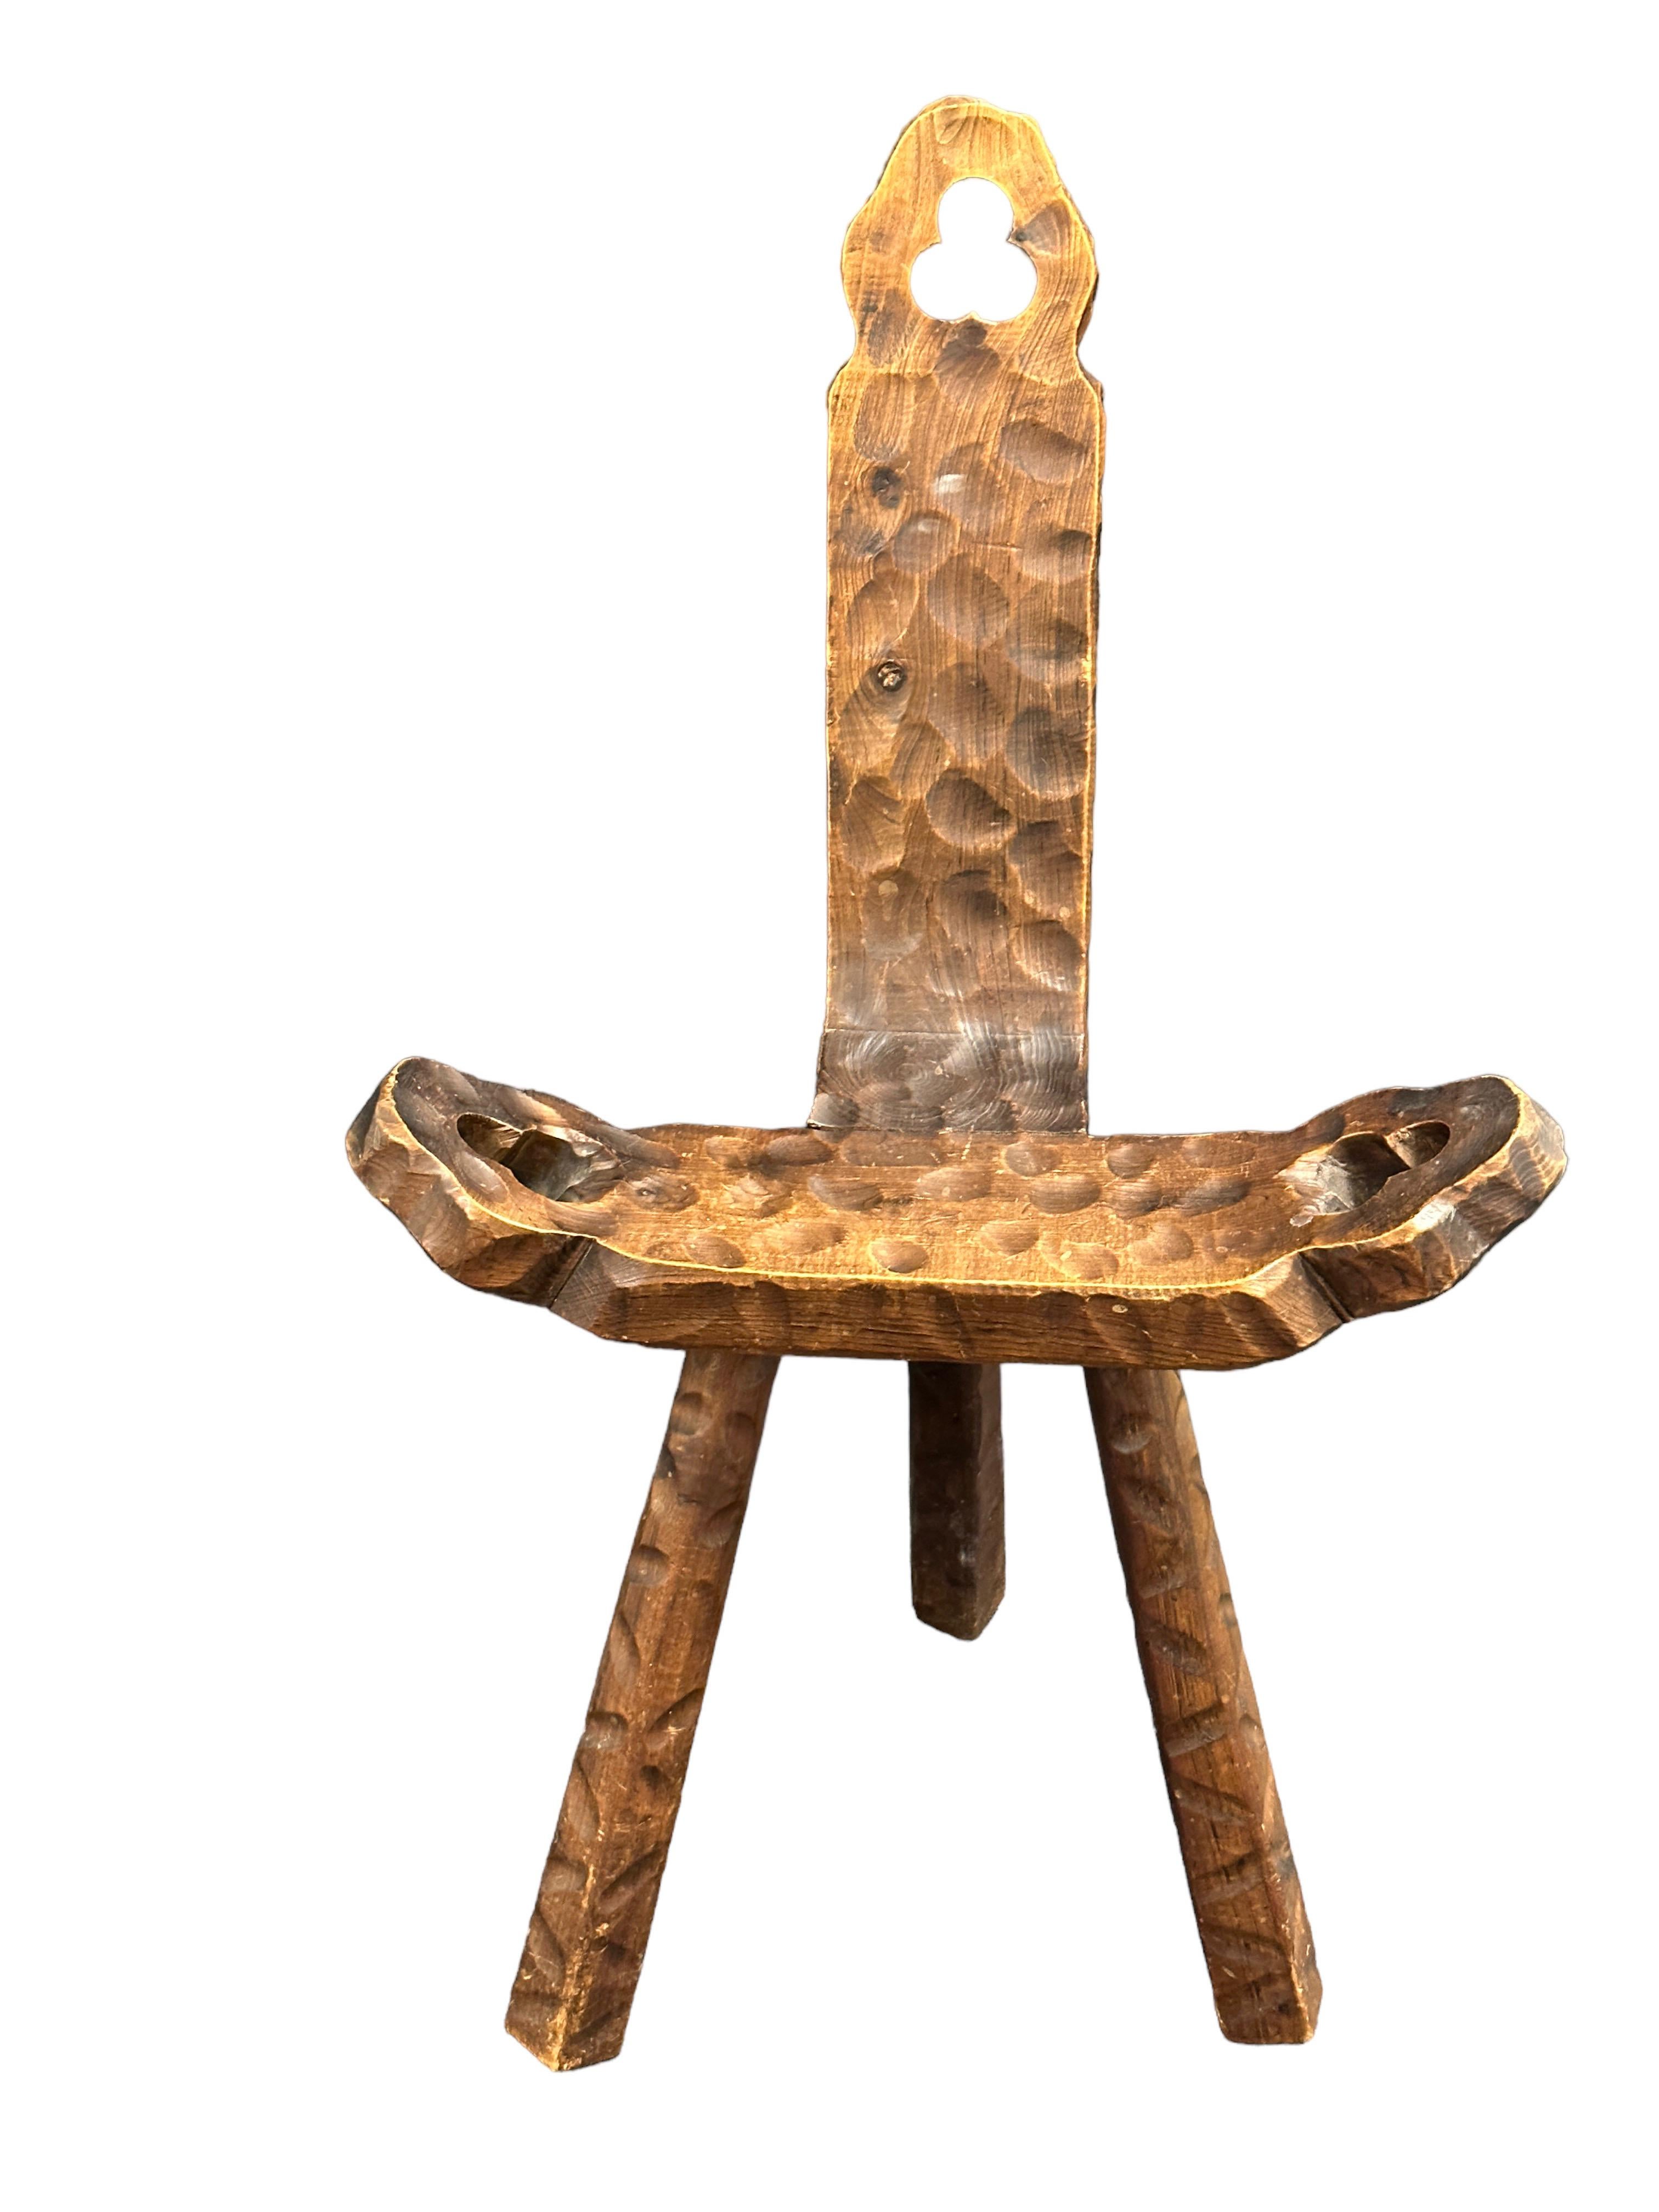 Interesting Brutalist wood tripod chair from Spain. Notched holes in head rest and both arms. Historically used as a birthing chair. Great piece of functional sculpture. Good condition to wood. One leg a little wobbly which doesn't affect stability.